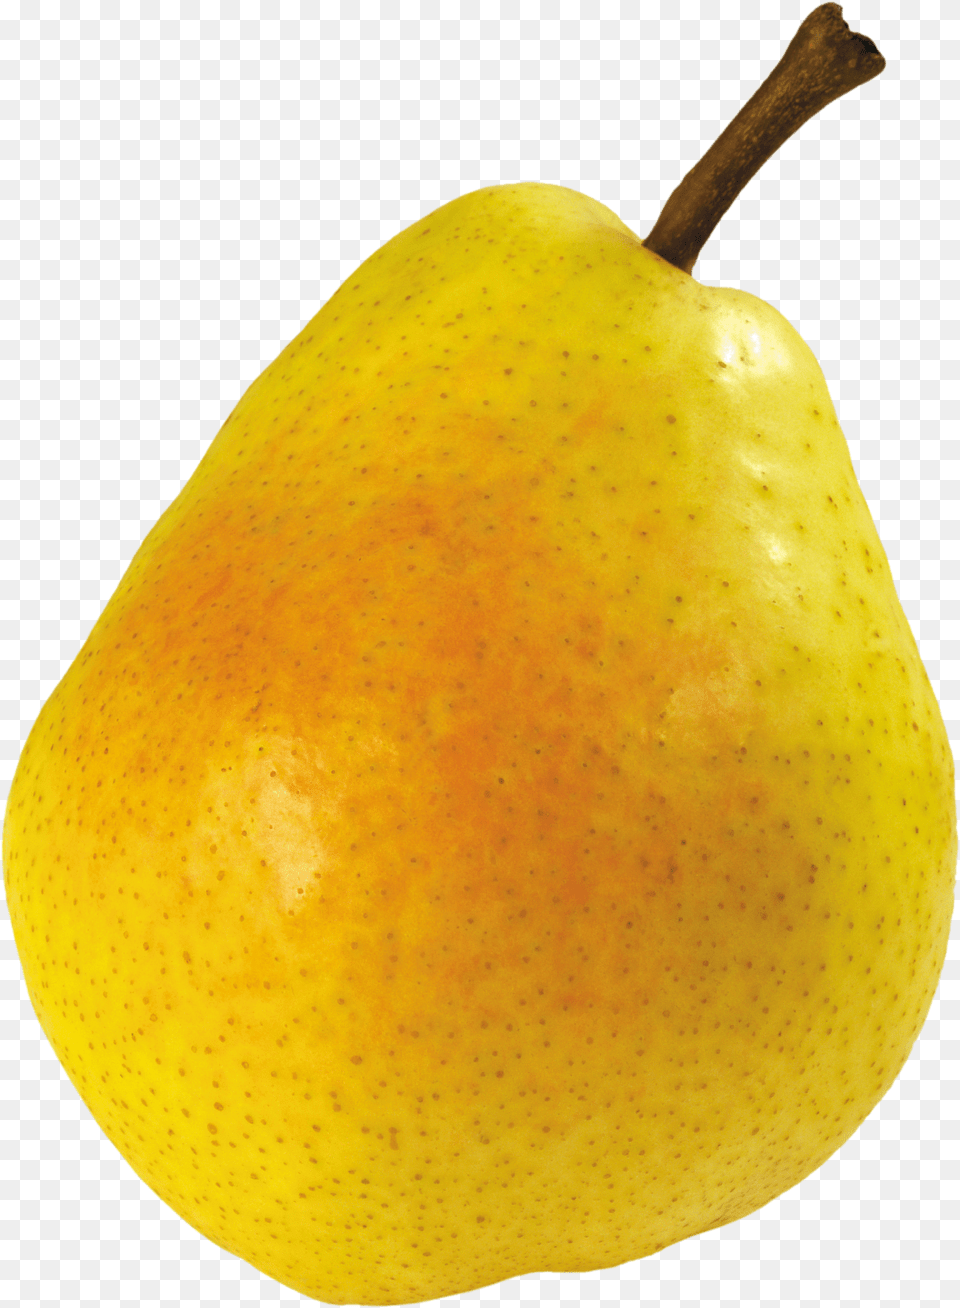 Pear Transparent Background Png